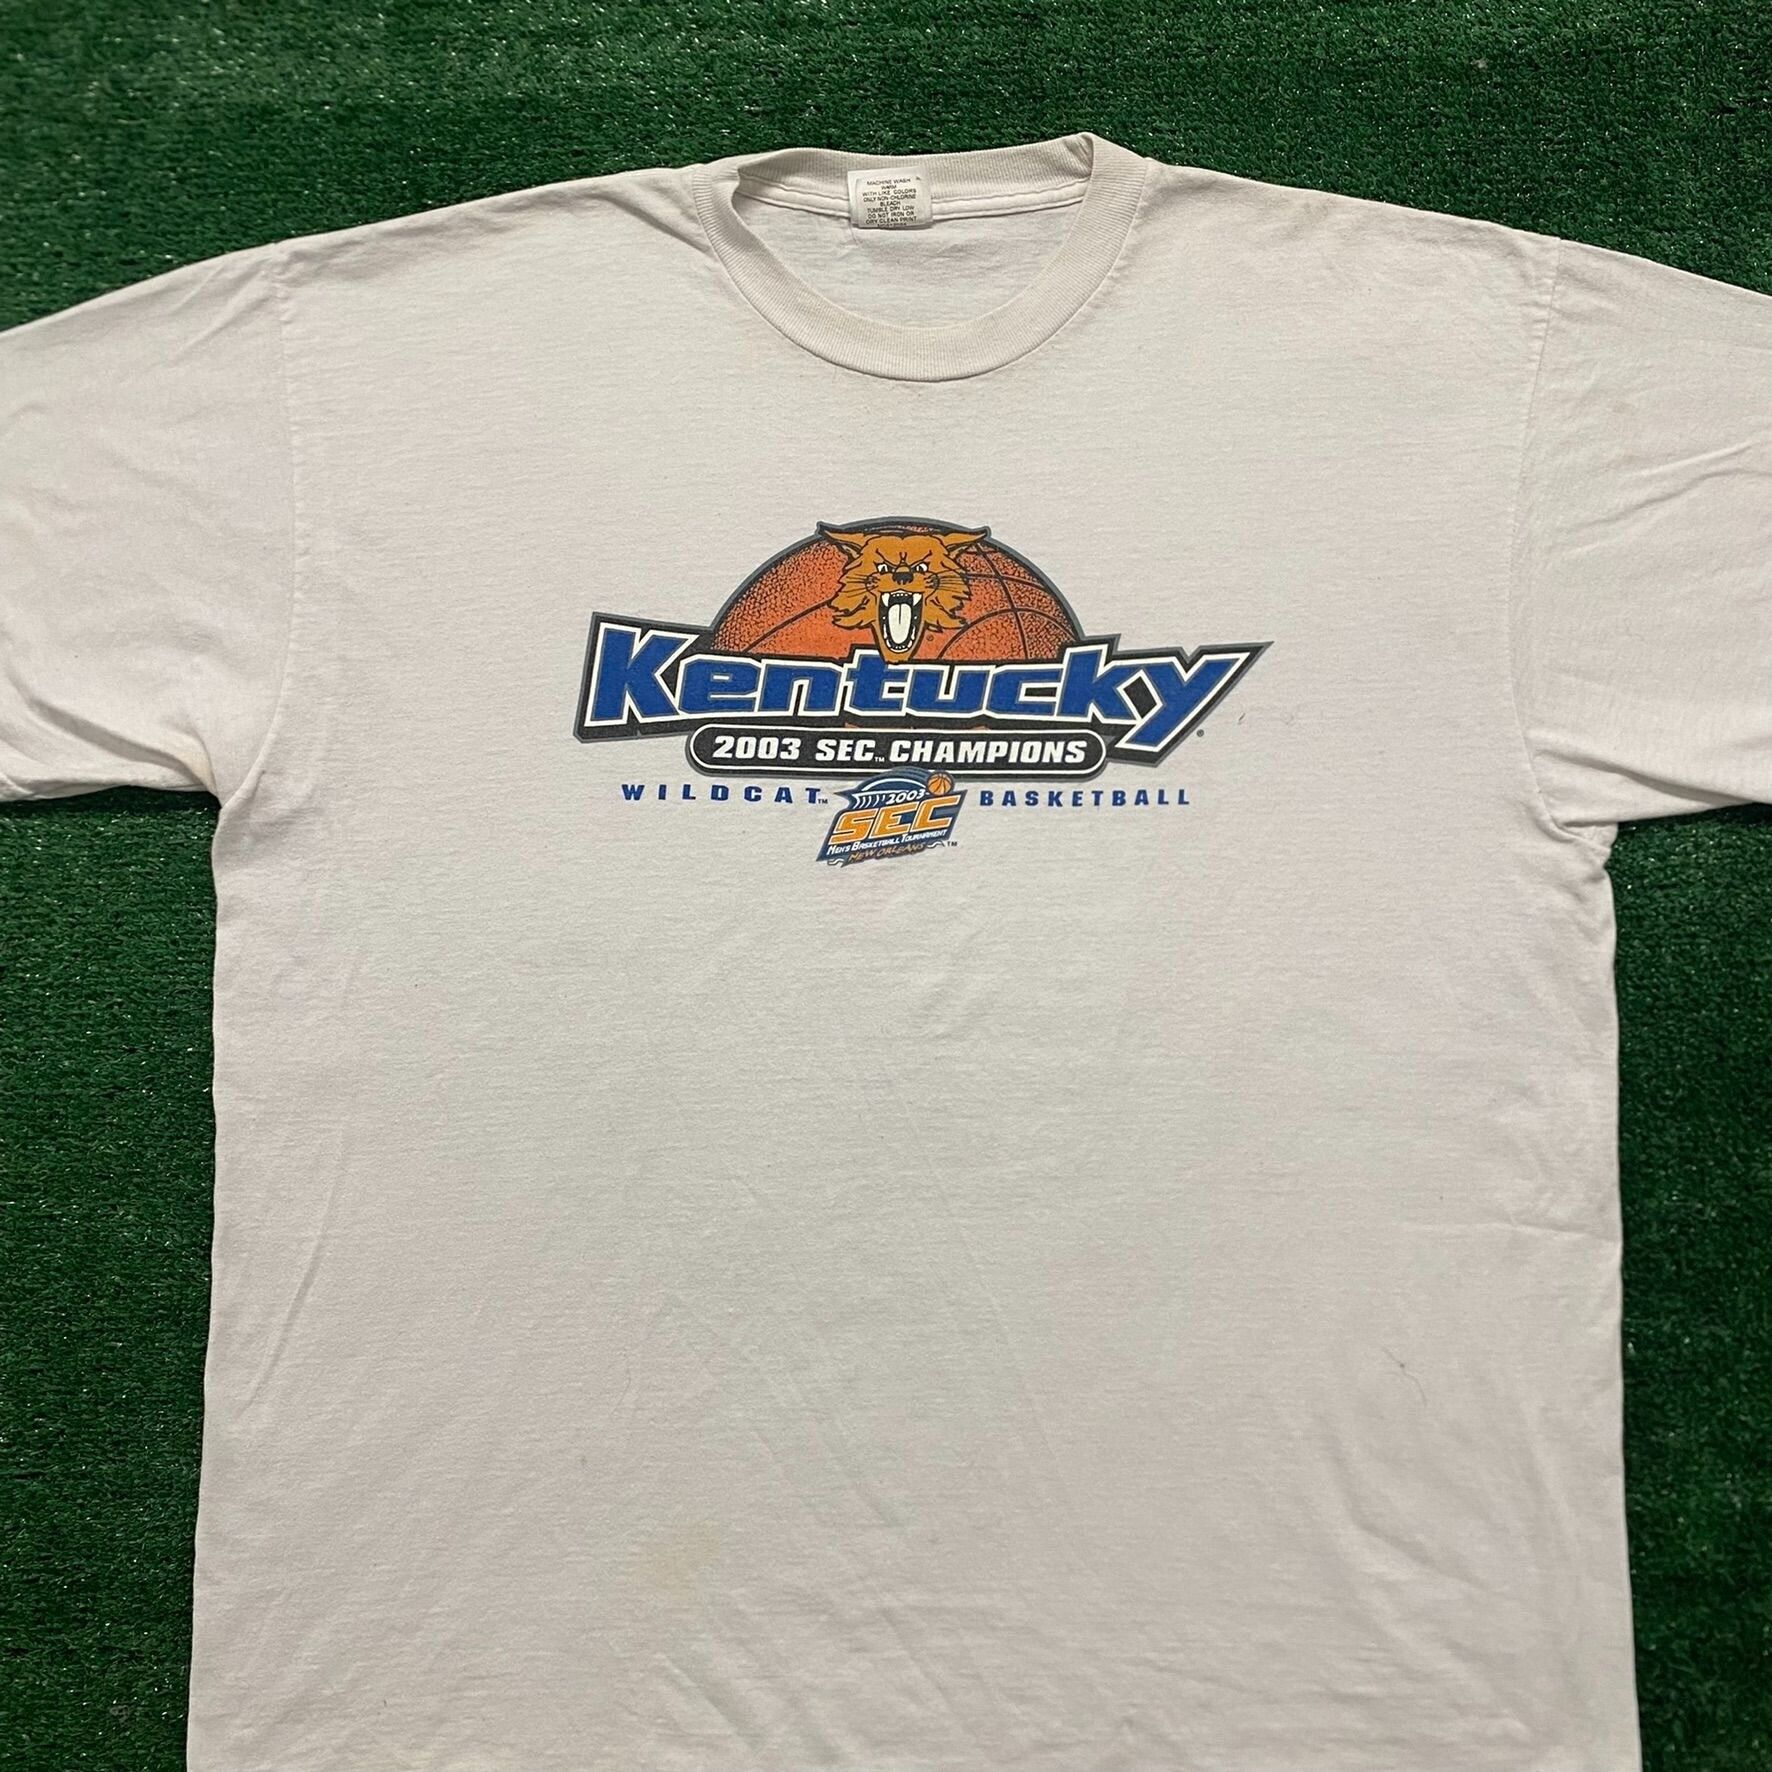 Vintage Vintage Y2K Kentucky Wildcats Essential College Sports Tee Size US XXL / EU 58 / 5 - 1 Preview